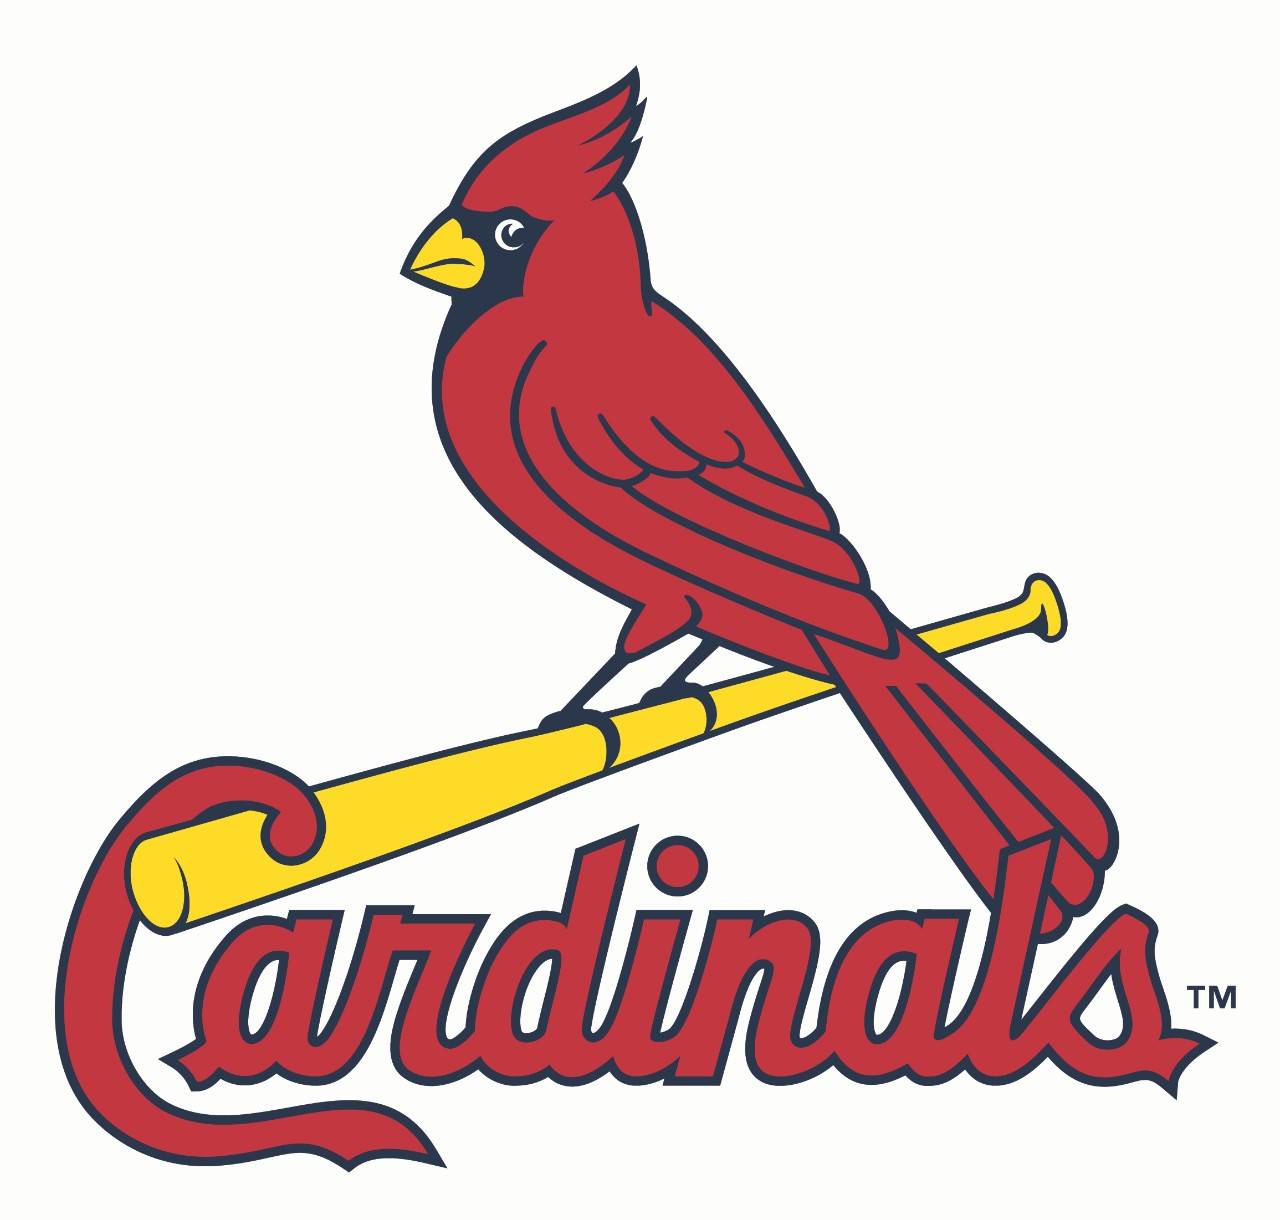 Cardinals Official Primary Club Logo Mark
3 Color PMS version